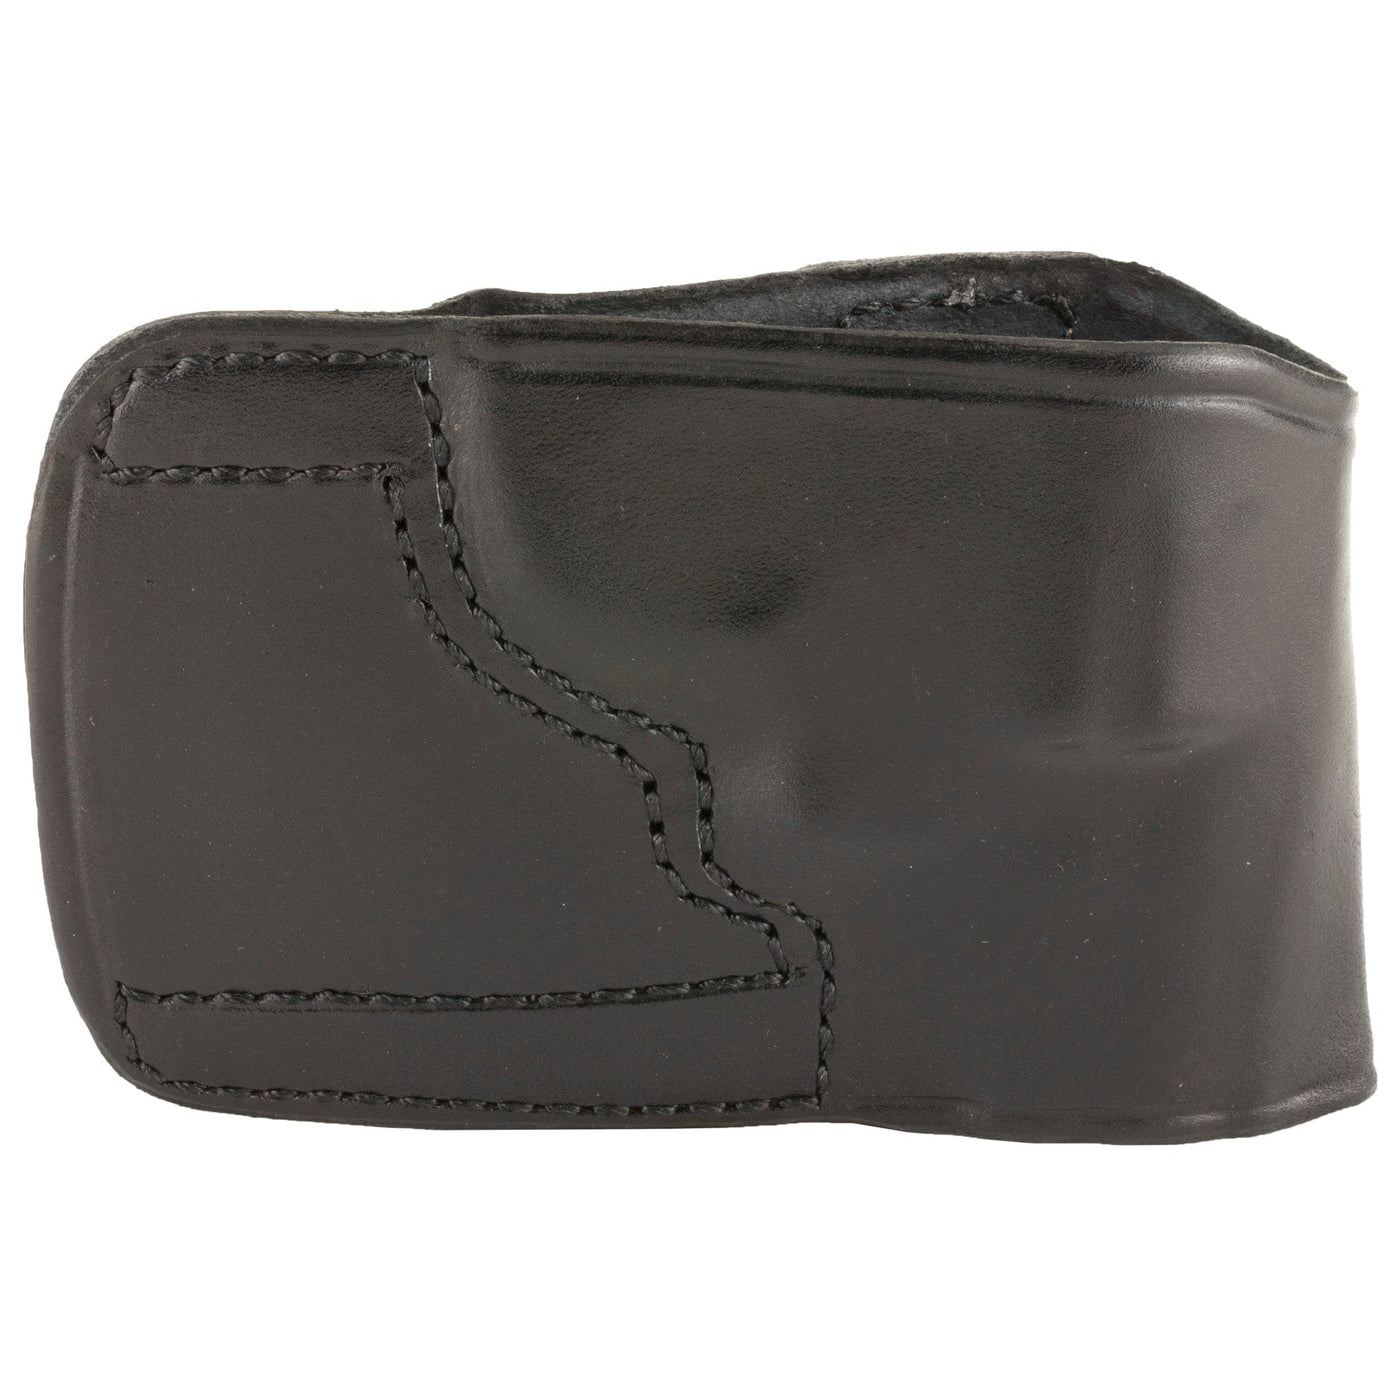 Don Hume D Hume Jit 1 S&w K Frame Rh Black Holsters